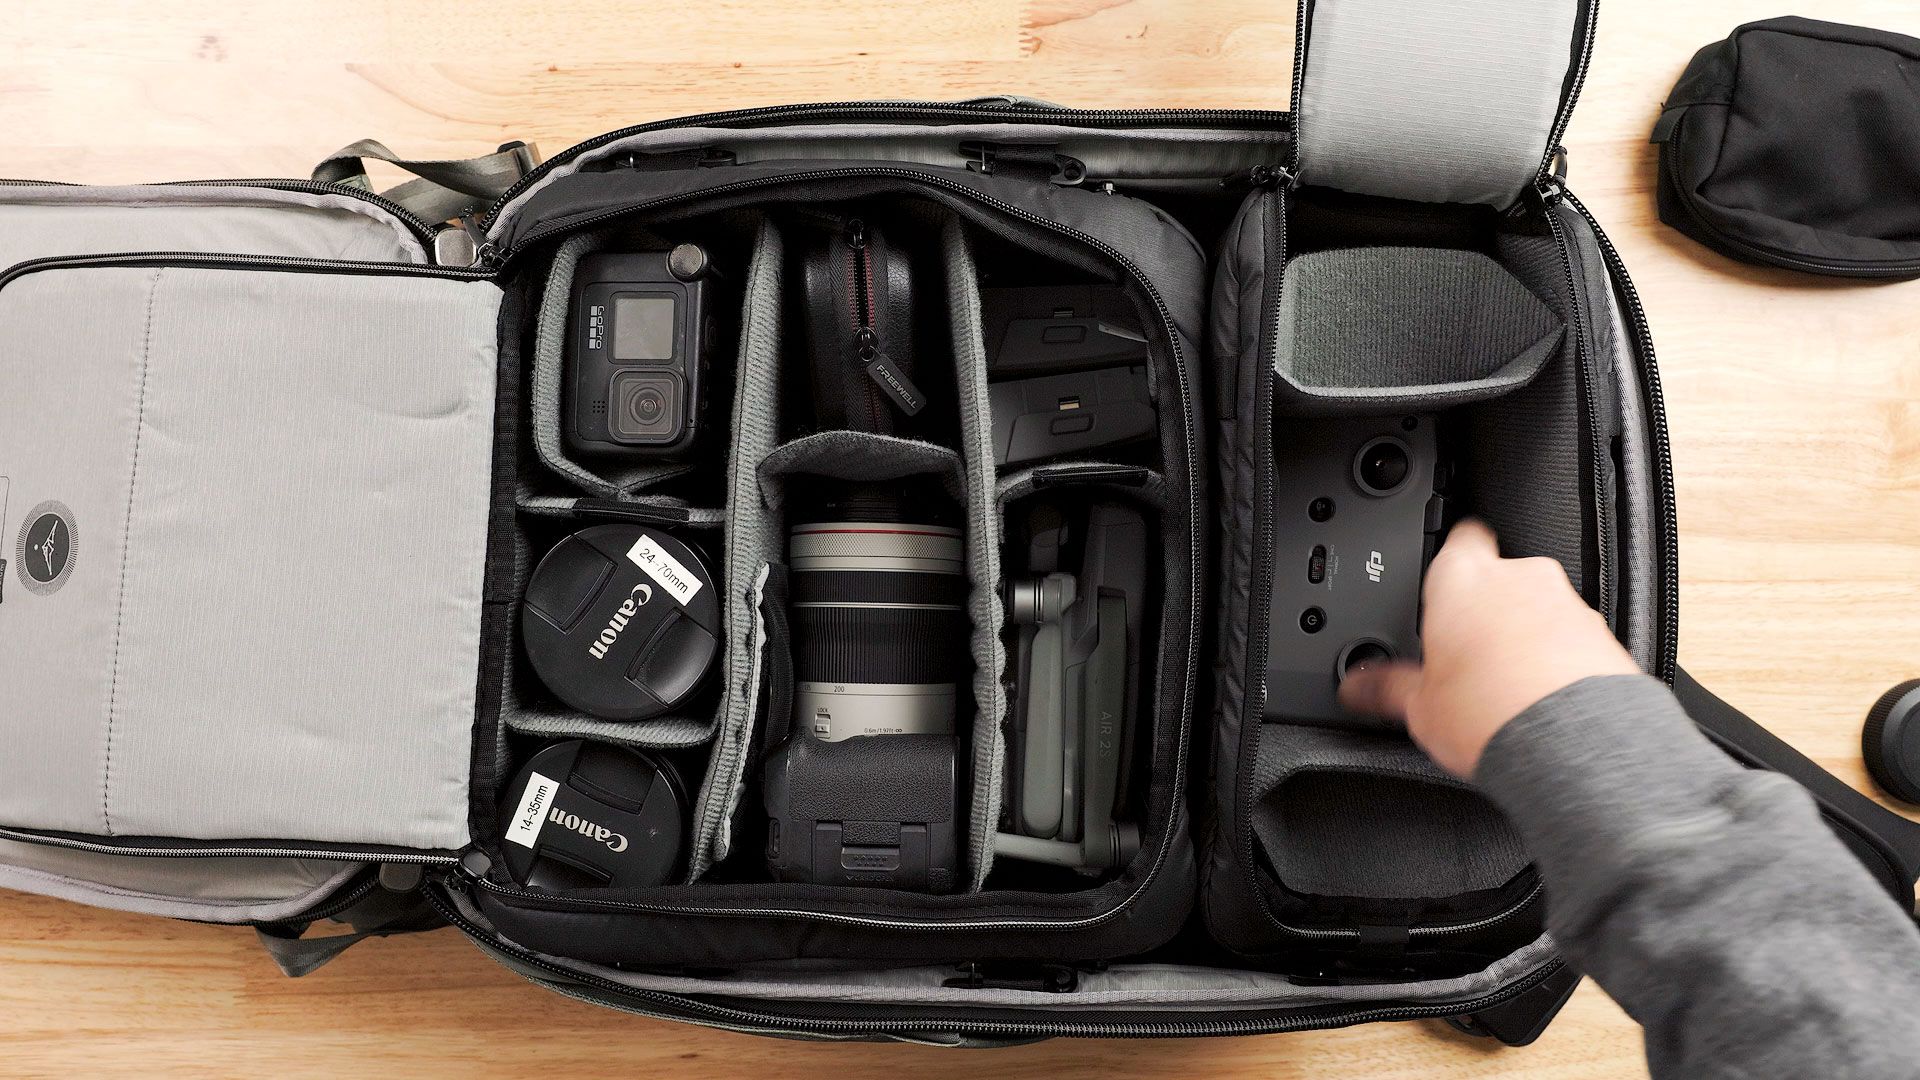 Peak Design camera cubes and gear in 45L Travel Backpack